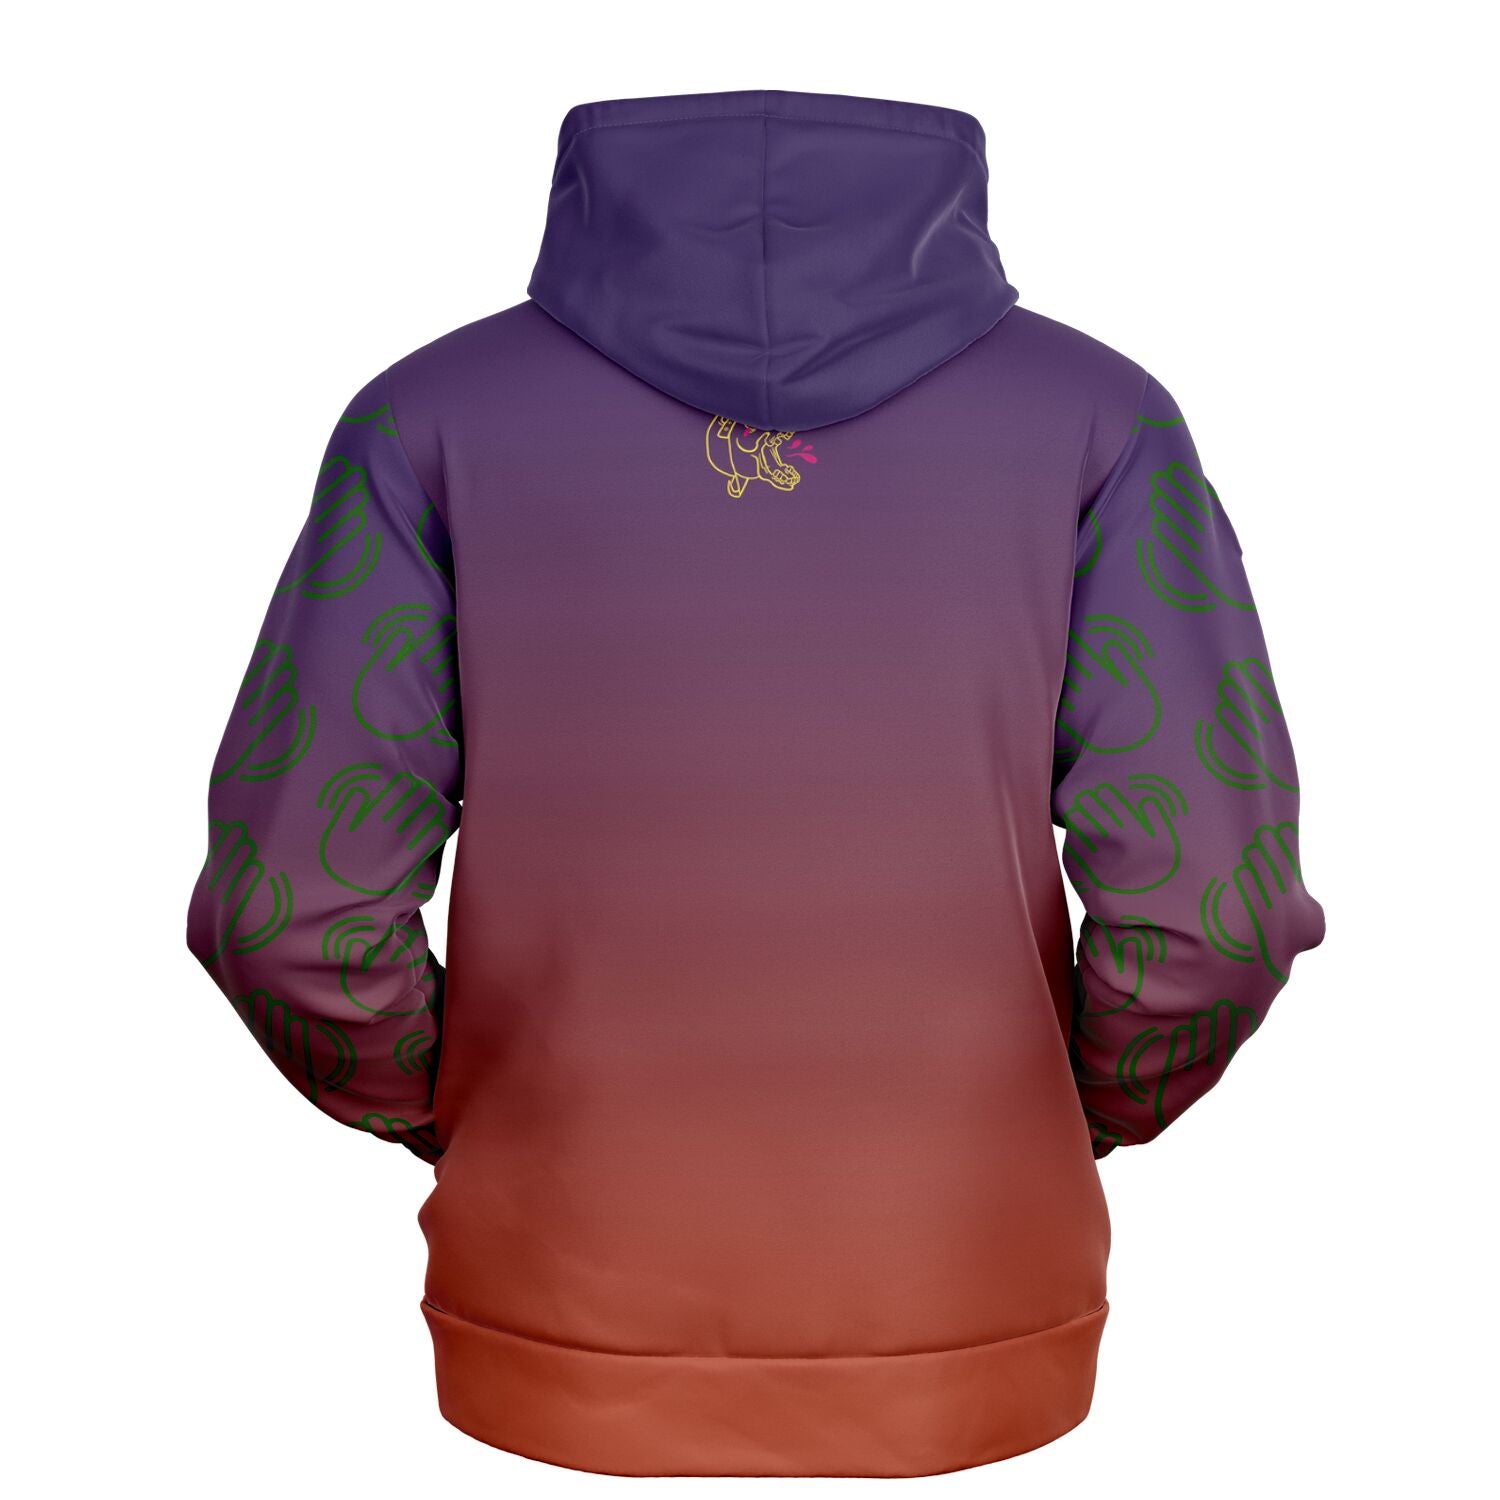 backside of a purple and red gradient colored hoodie. The skelleton blood logo can barely be seen just under the hood